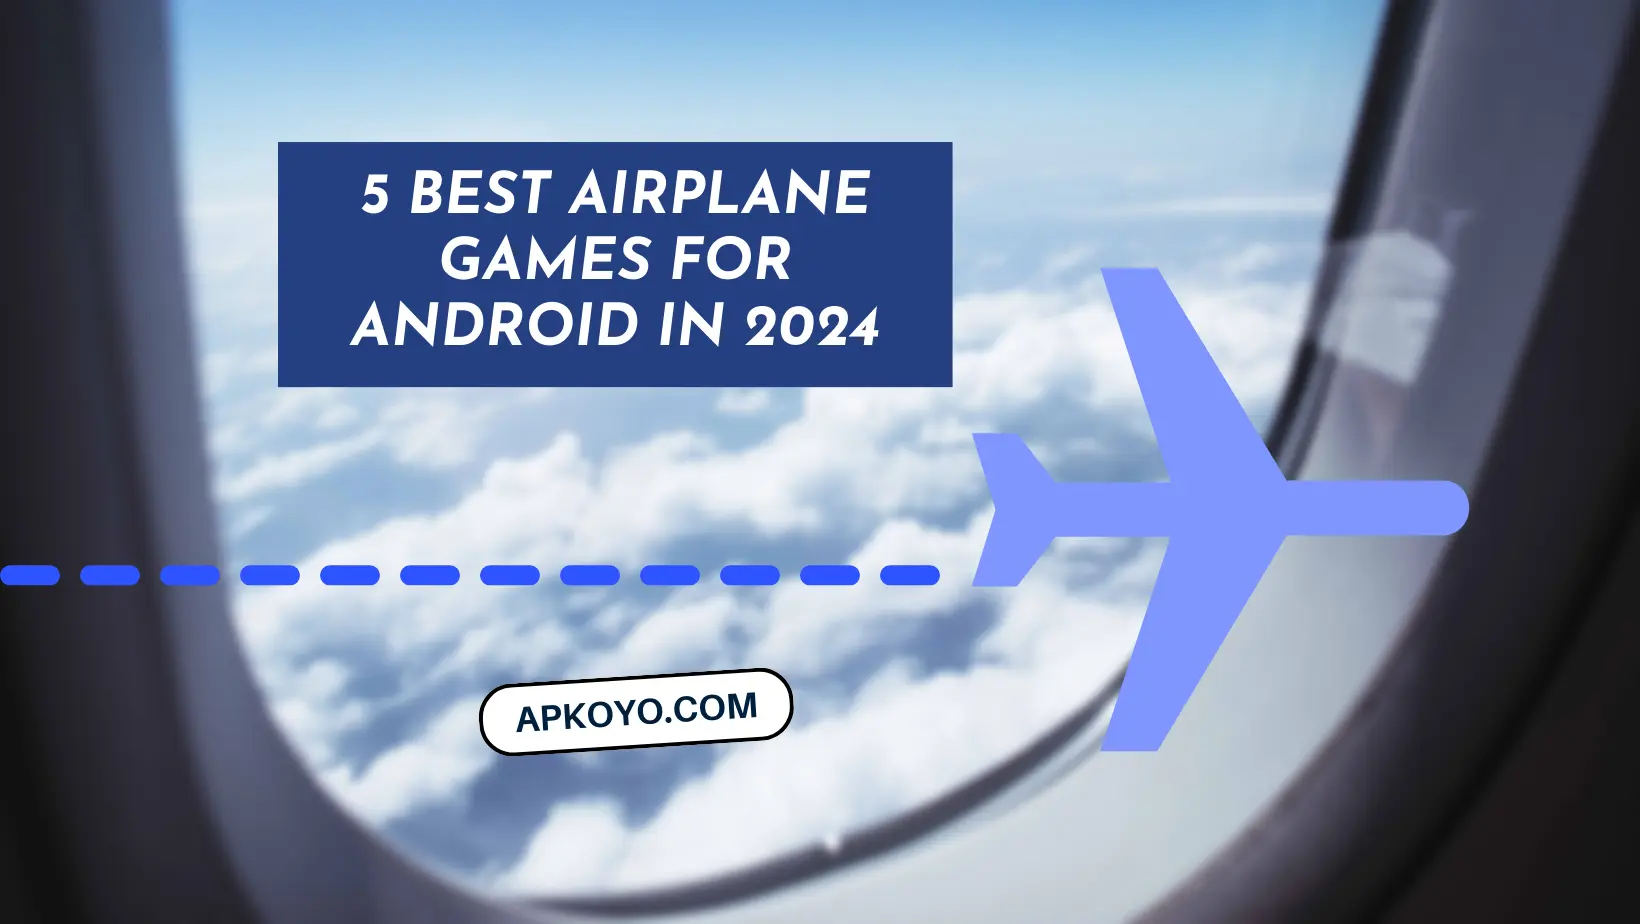 5 Best Airplane Games for Android in 2024